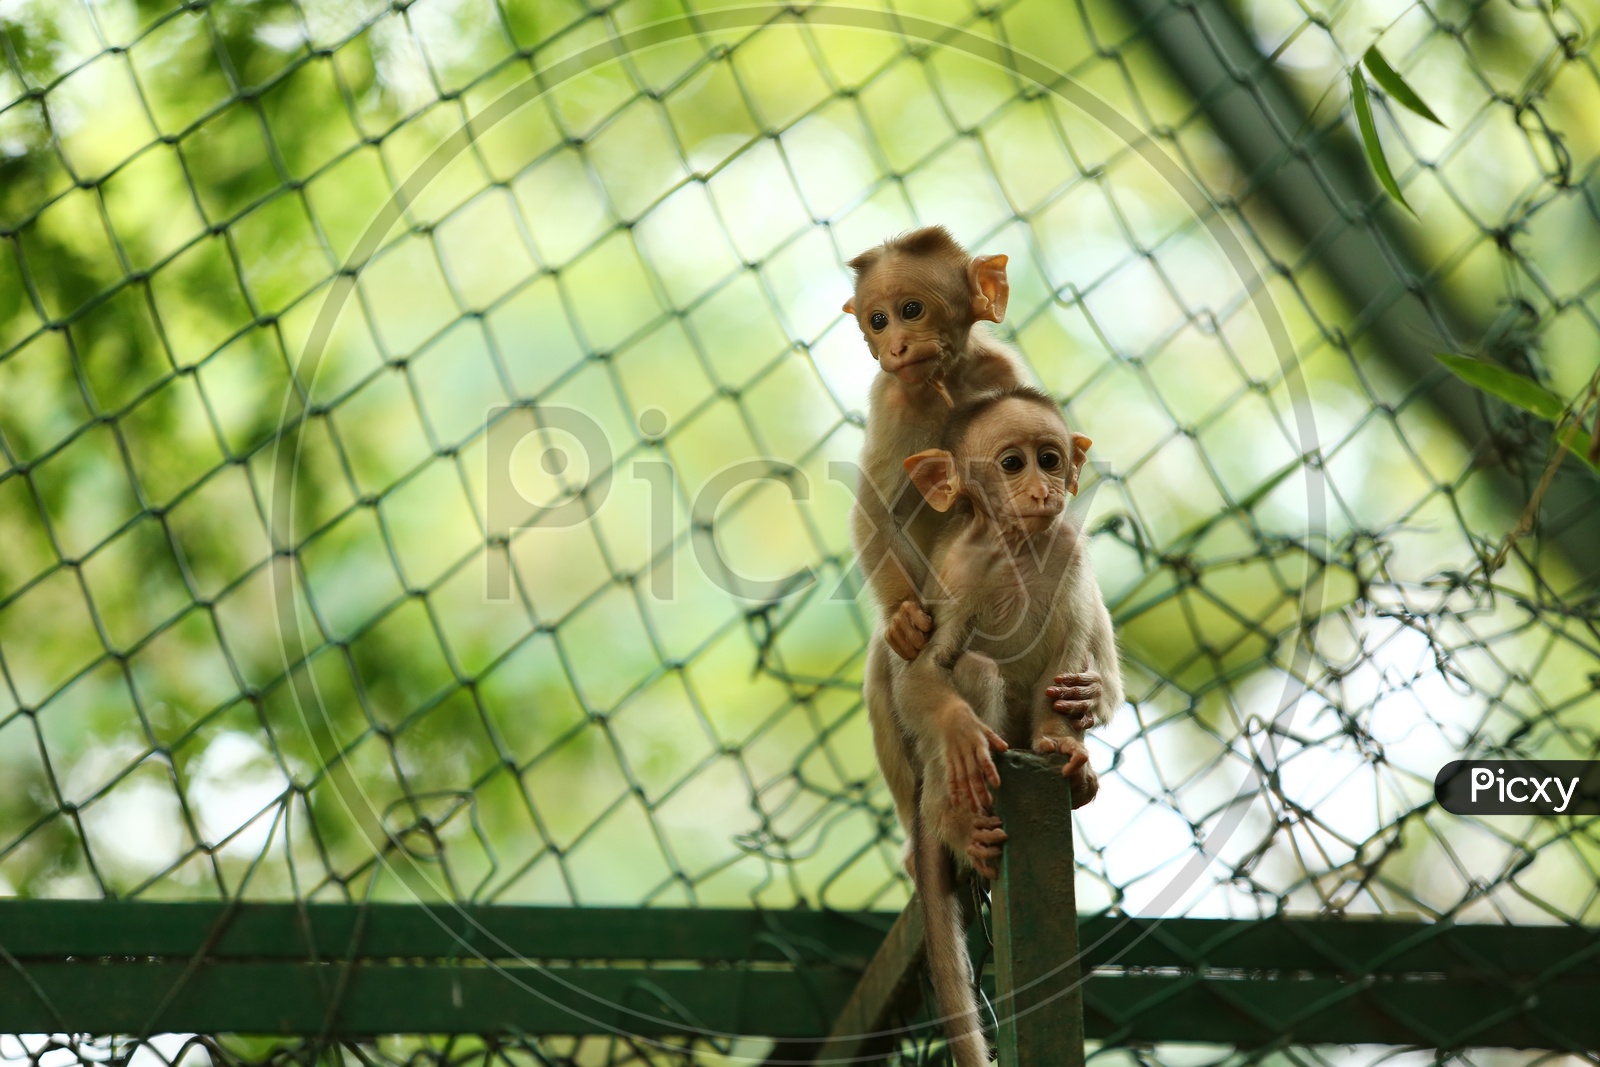 Young Indian  Monkey Or Macaque Playing In a Zoo Cage Backdrop